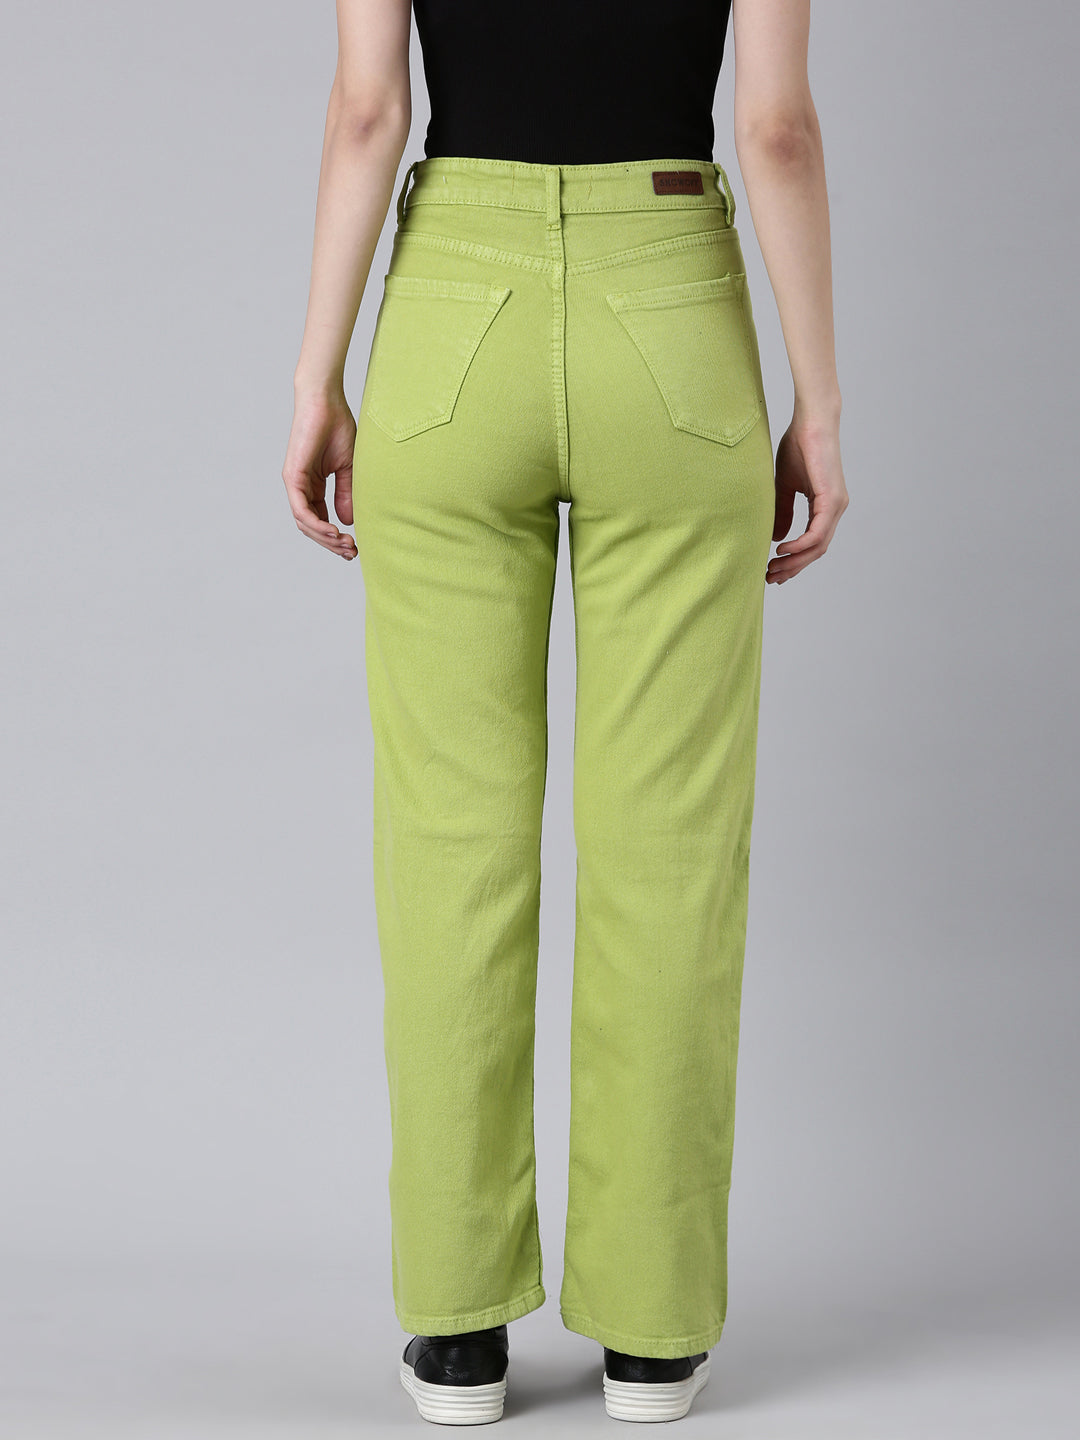 Women Lime Green Solid Straight Fit Denim Jeans